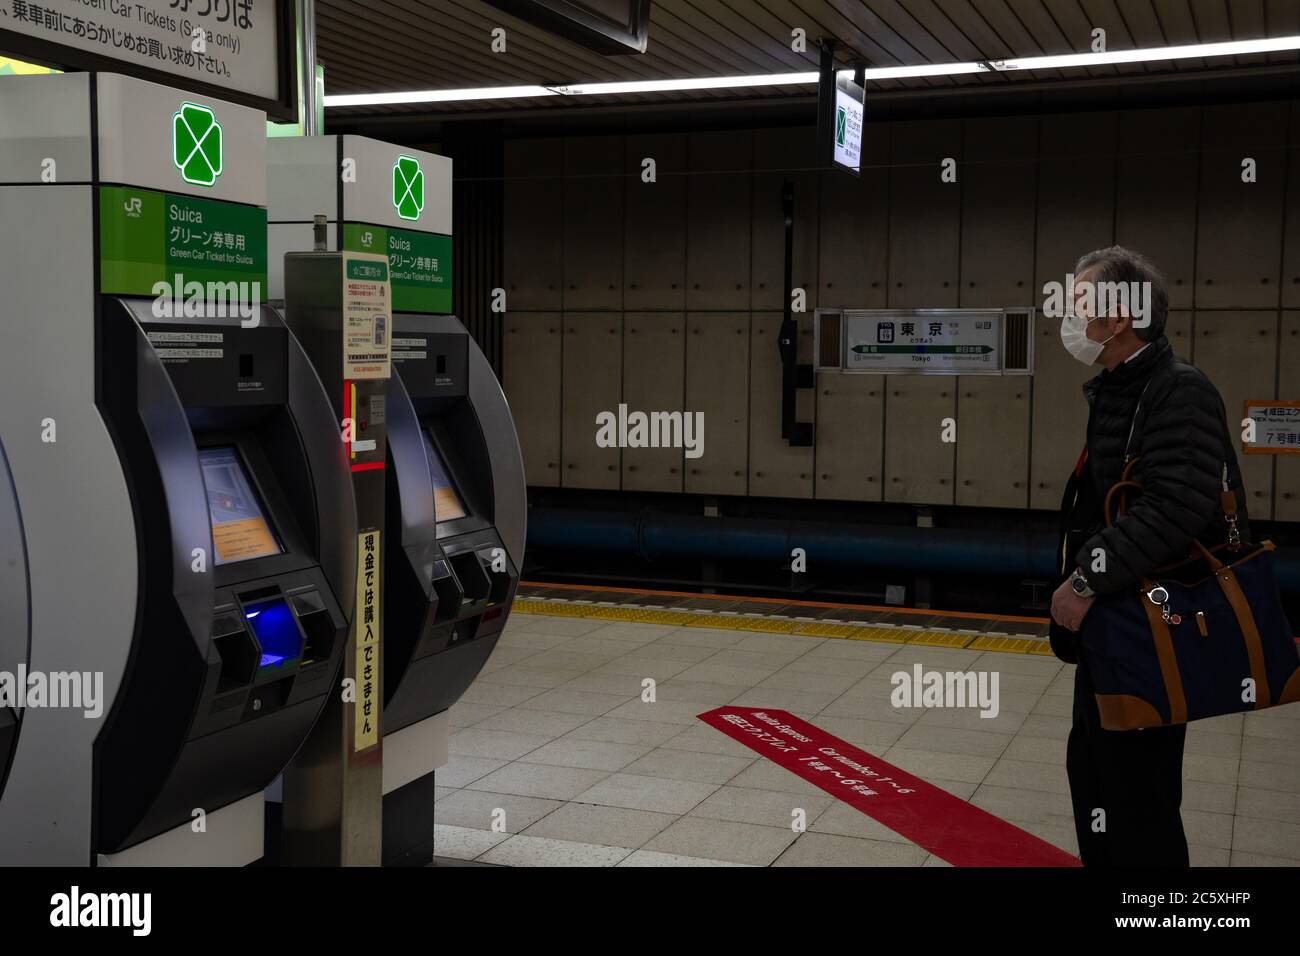 An elderly Japanese man wearing a face mask approachs a Suica vending machine at a platform in Tokyo Station. Tokyo, Japan. Stock Photo